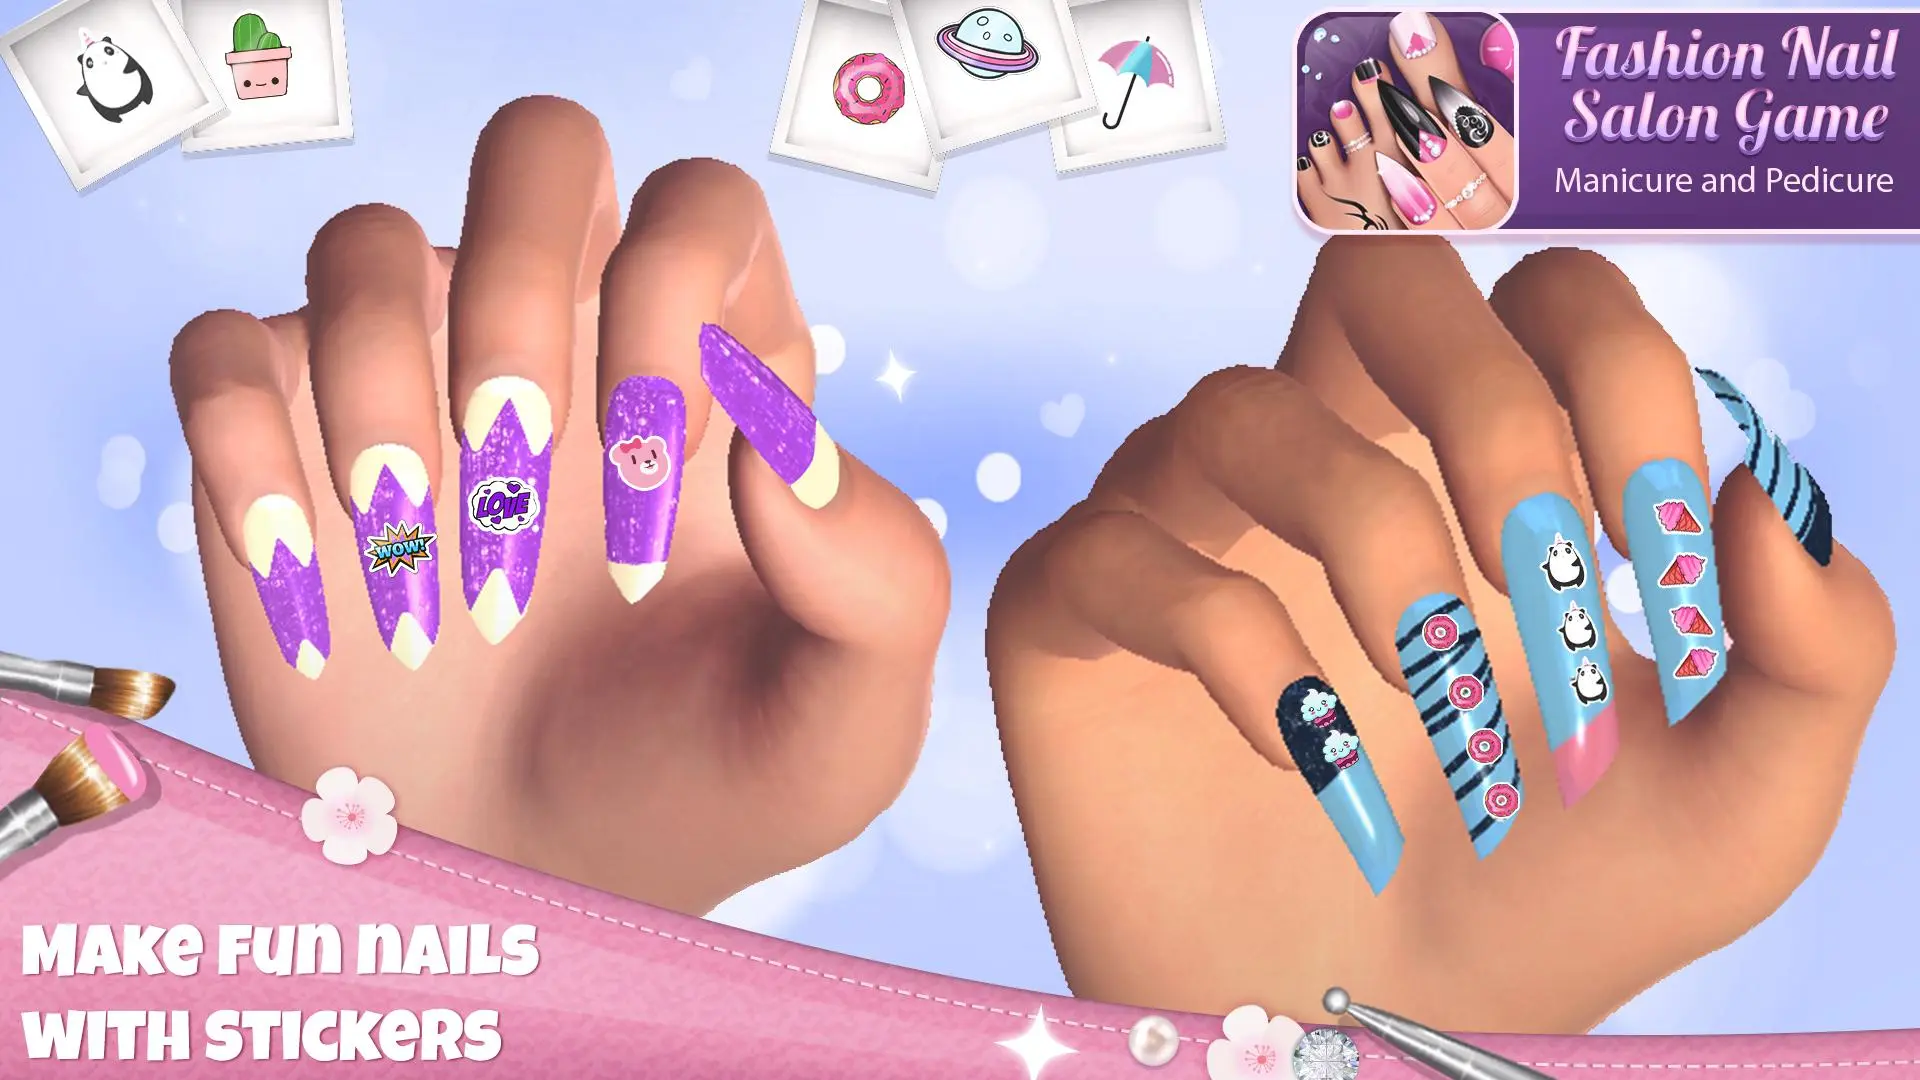 Download Fashion Nail Salon Game android on PC